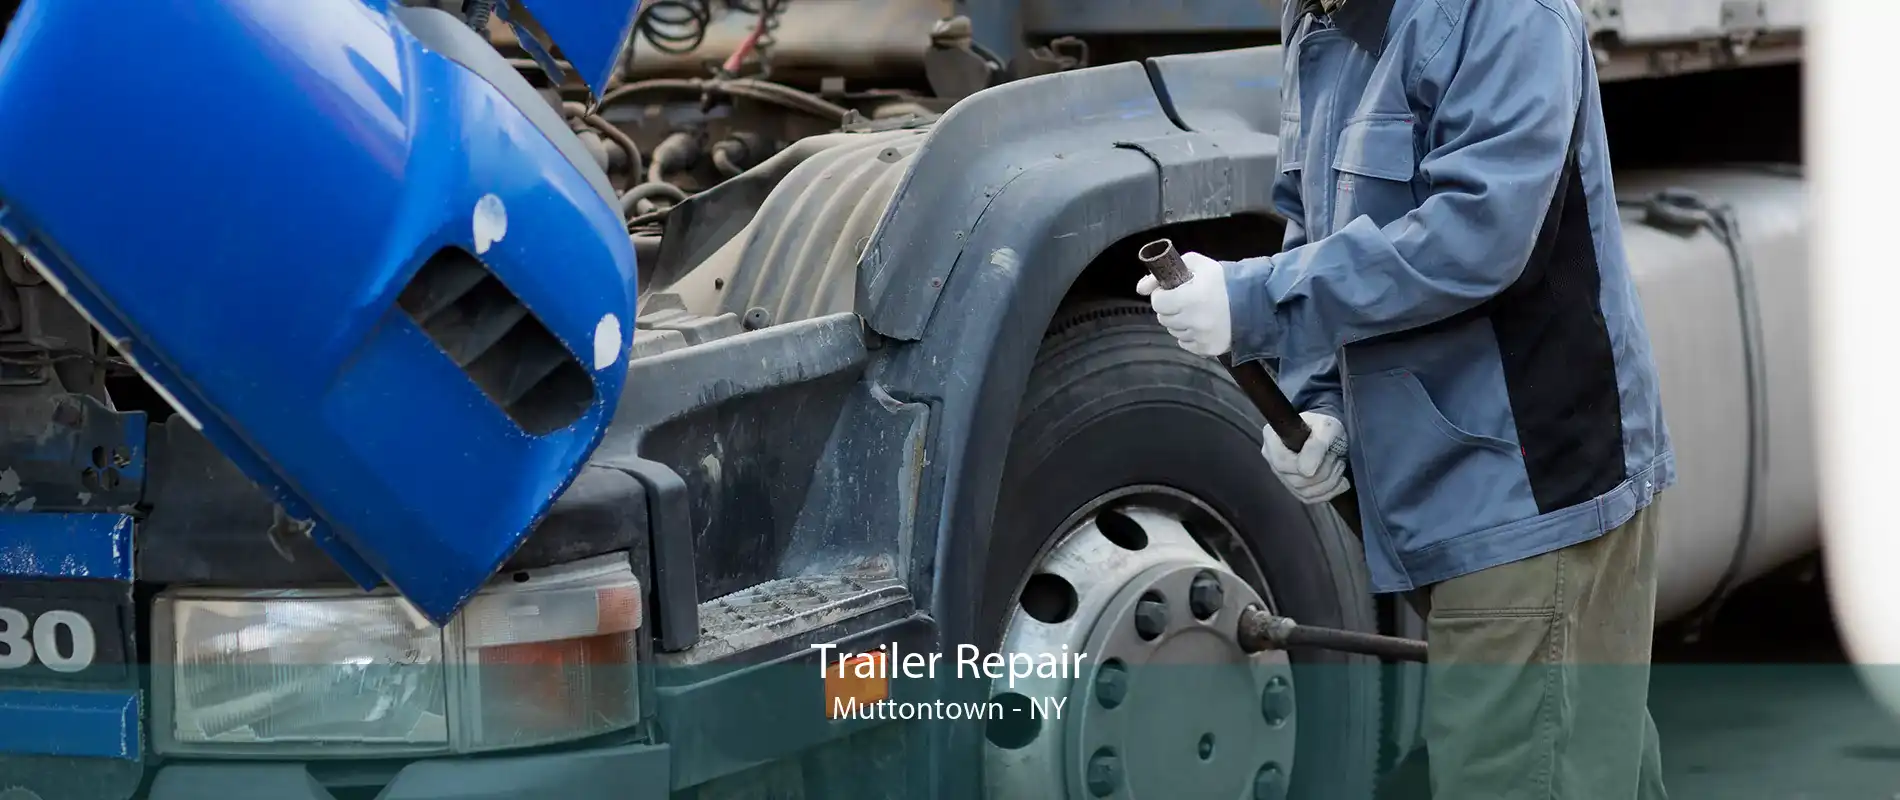 Trailer Repair Muttontown - NY